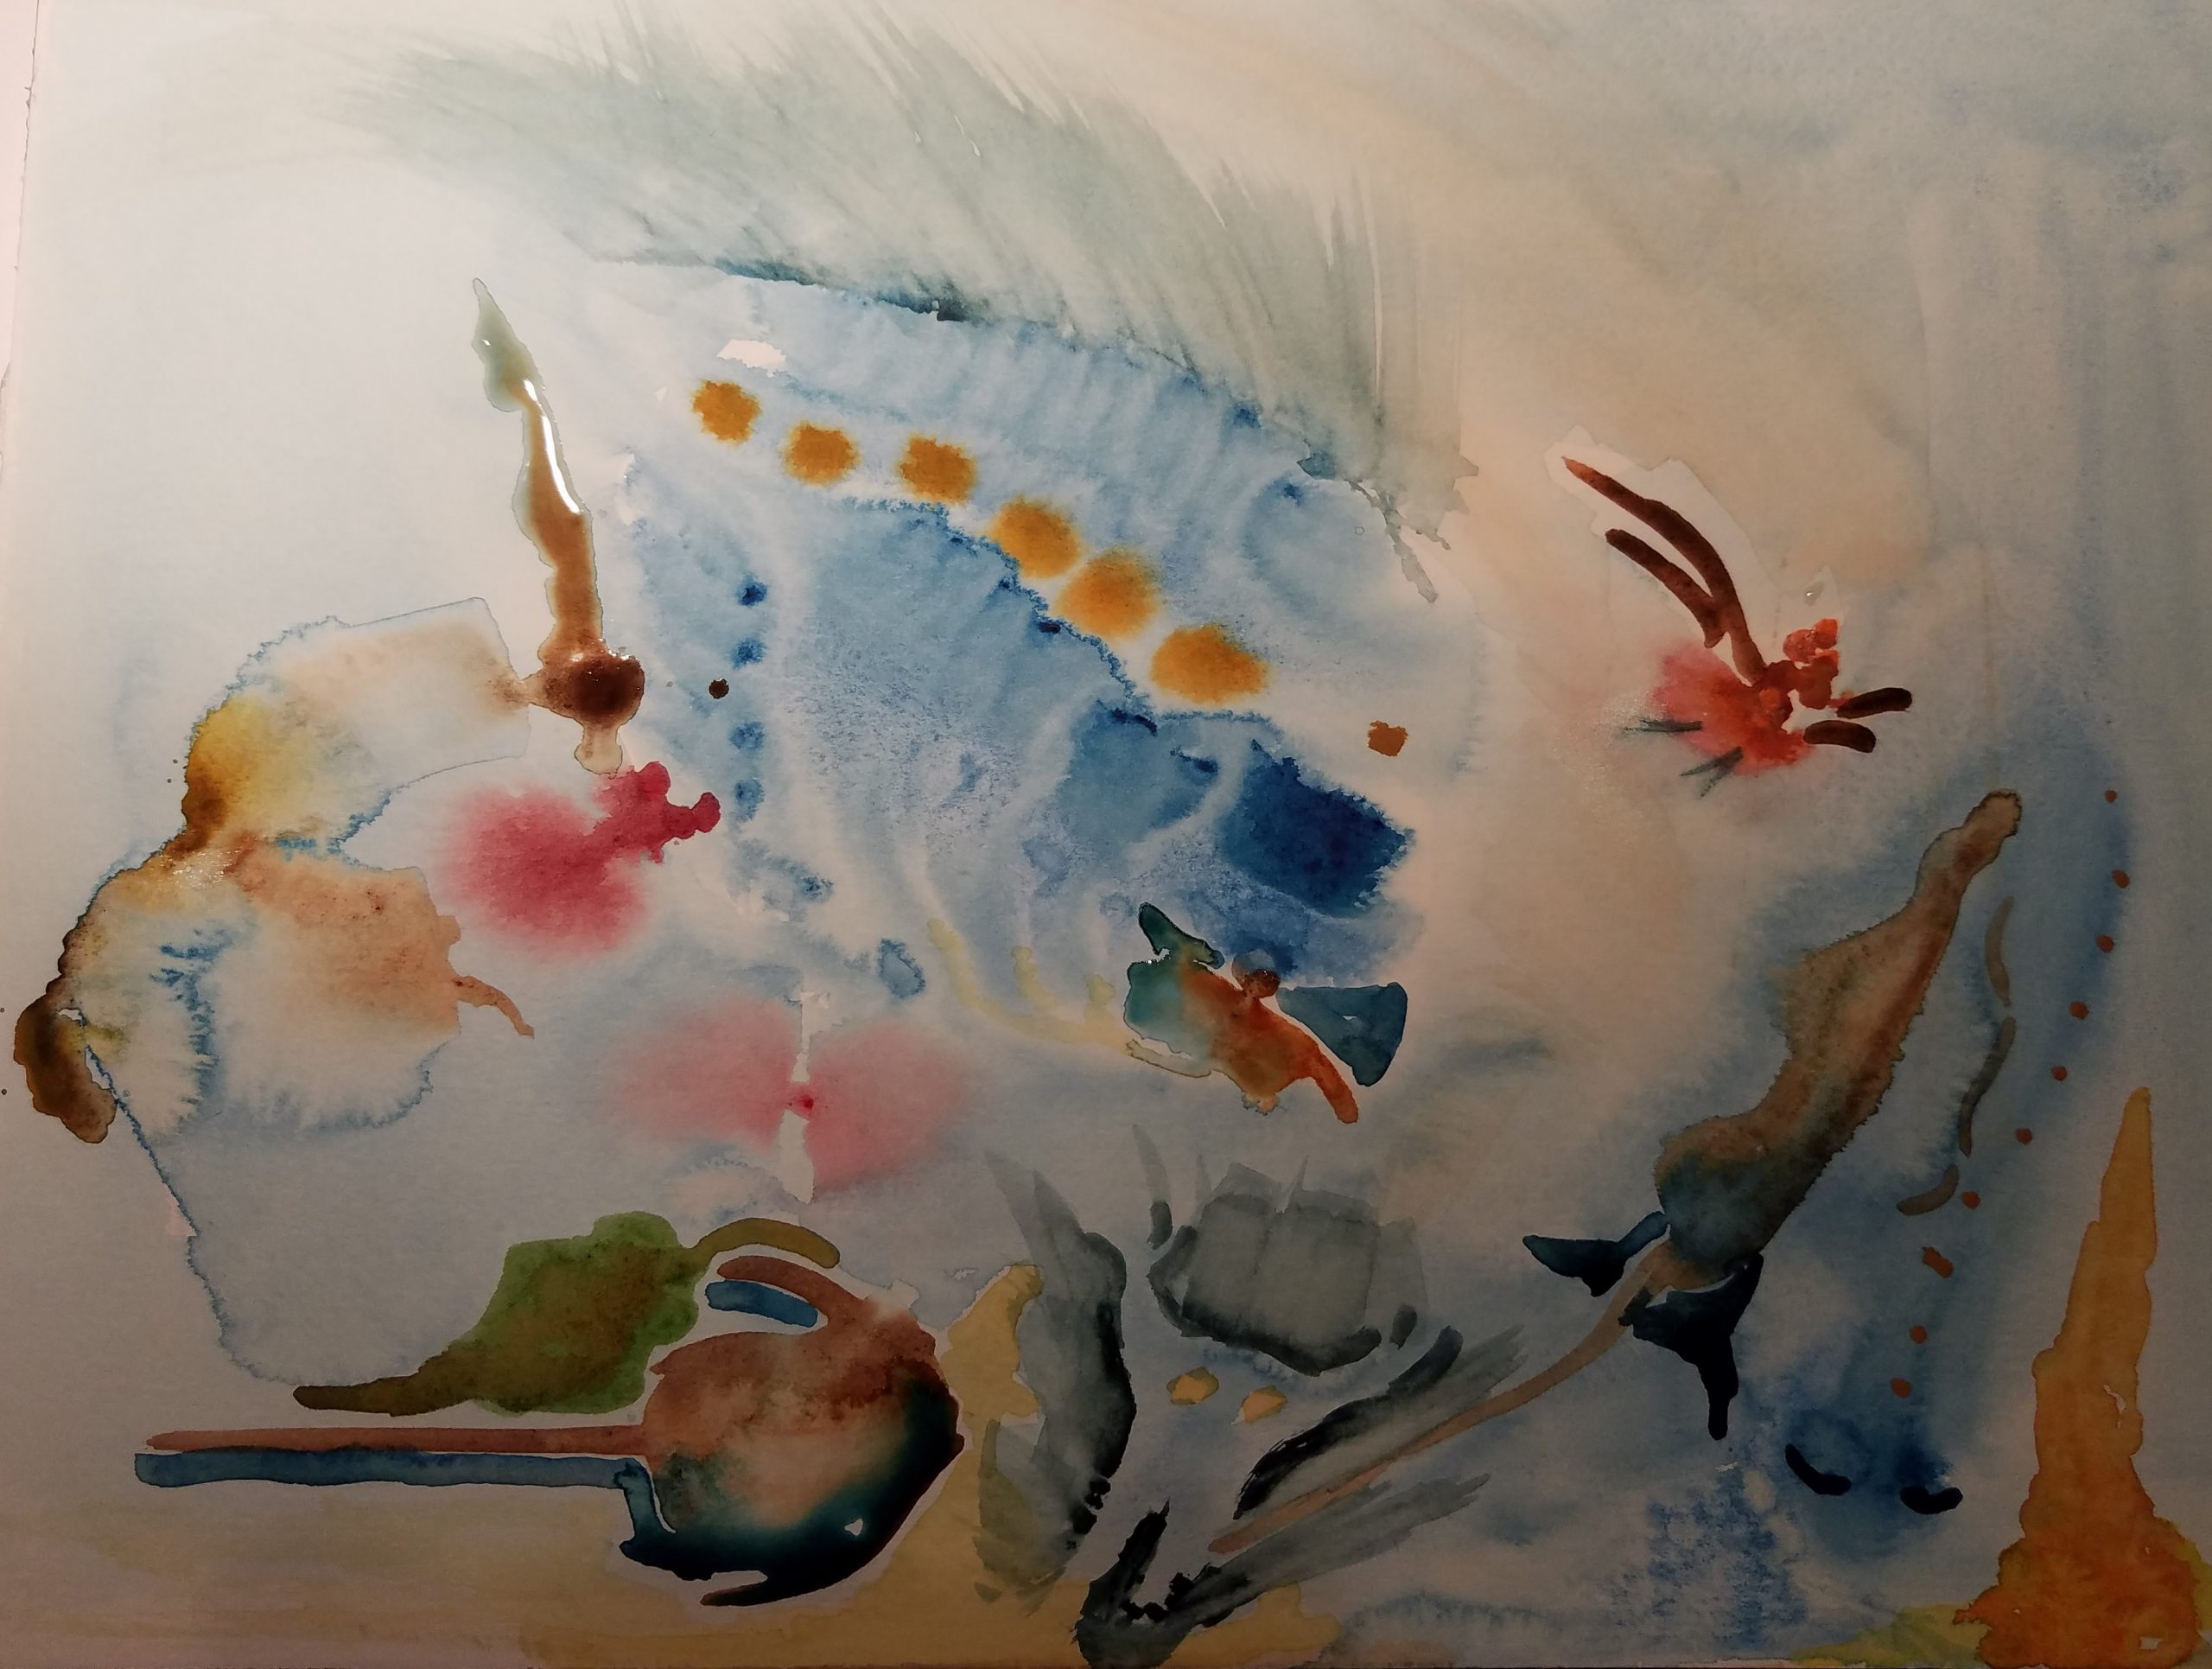 Watercolor: undefined shapes in blending shades of blue, brown, yellow and faint red suggestive of swimming or flight.